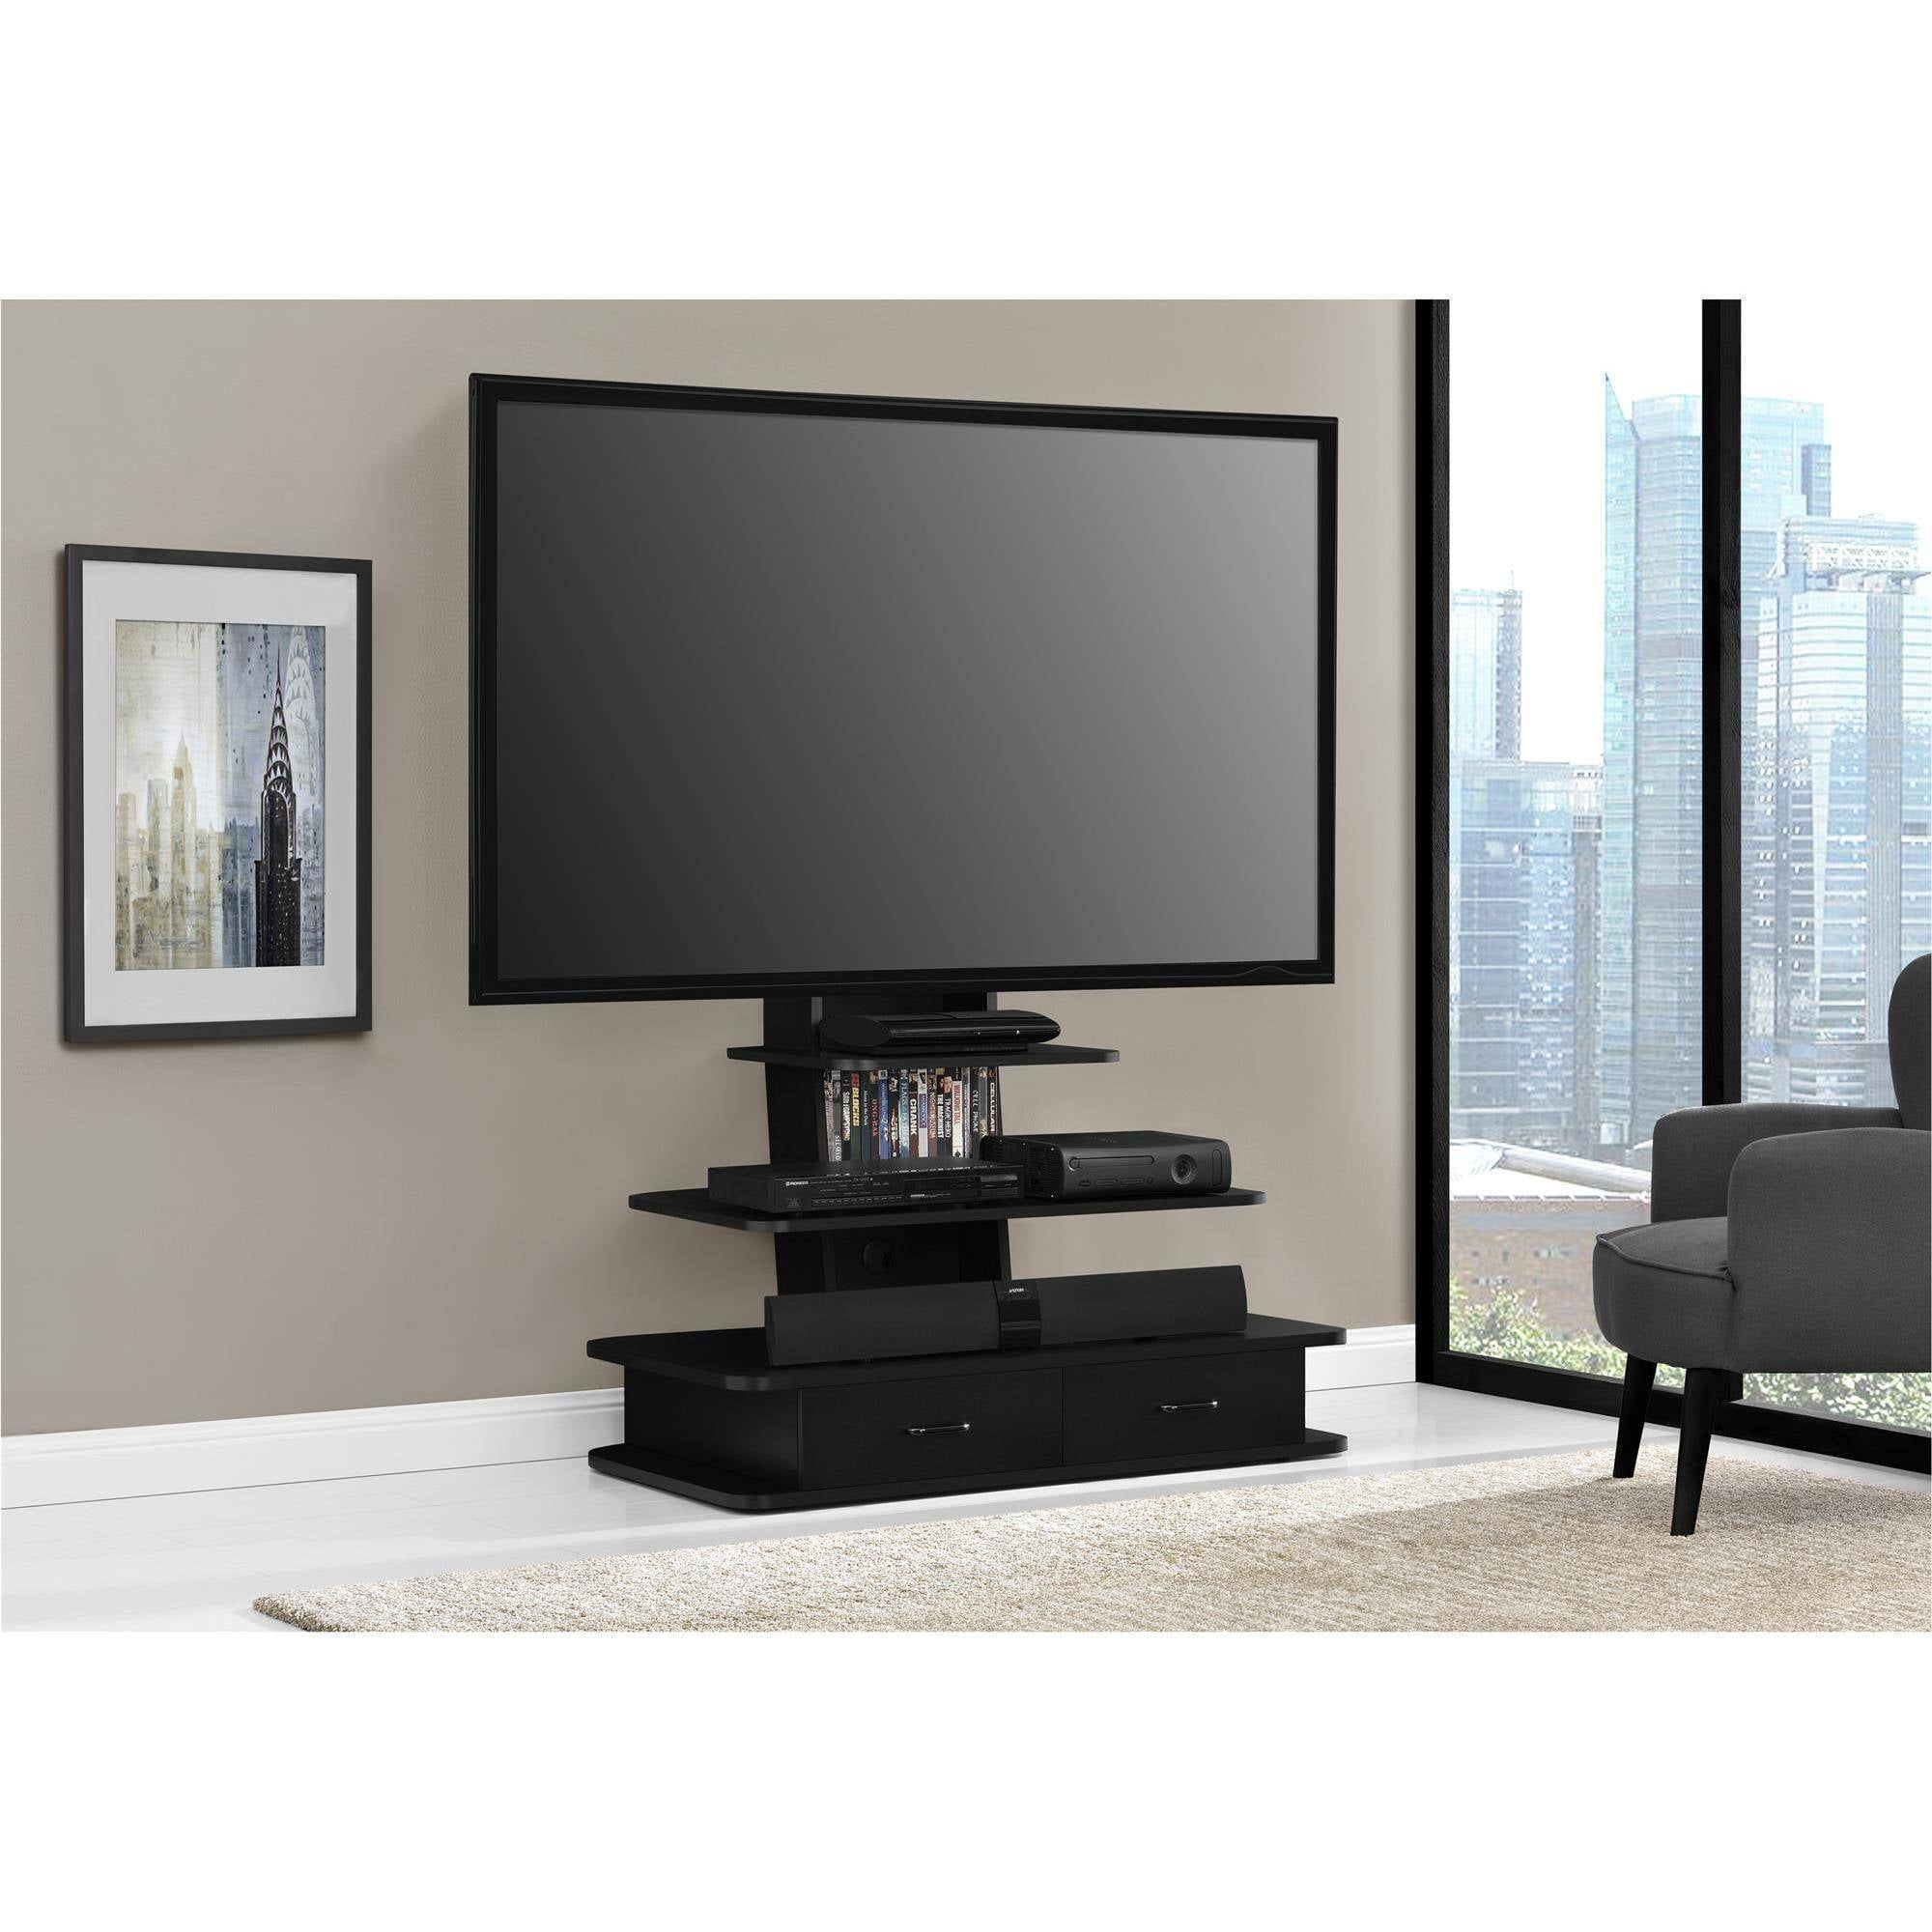 Large Entertainment Center Corner  65  Inch  Tall 70 TV  Stand  